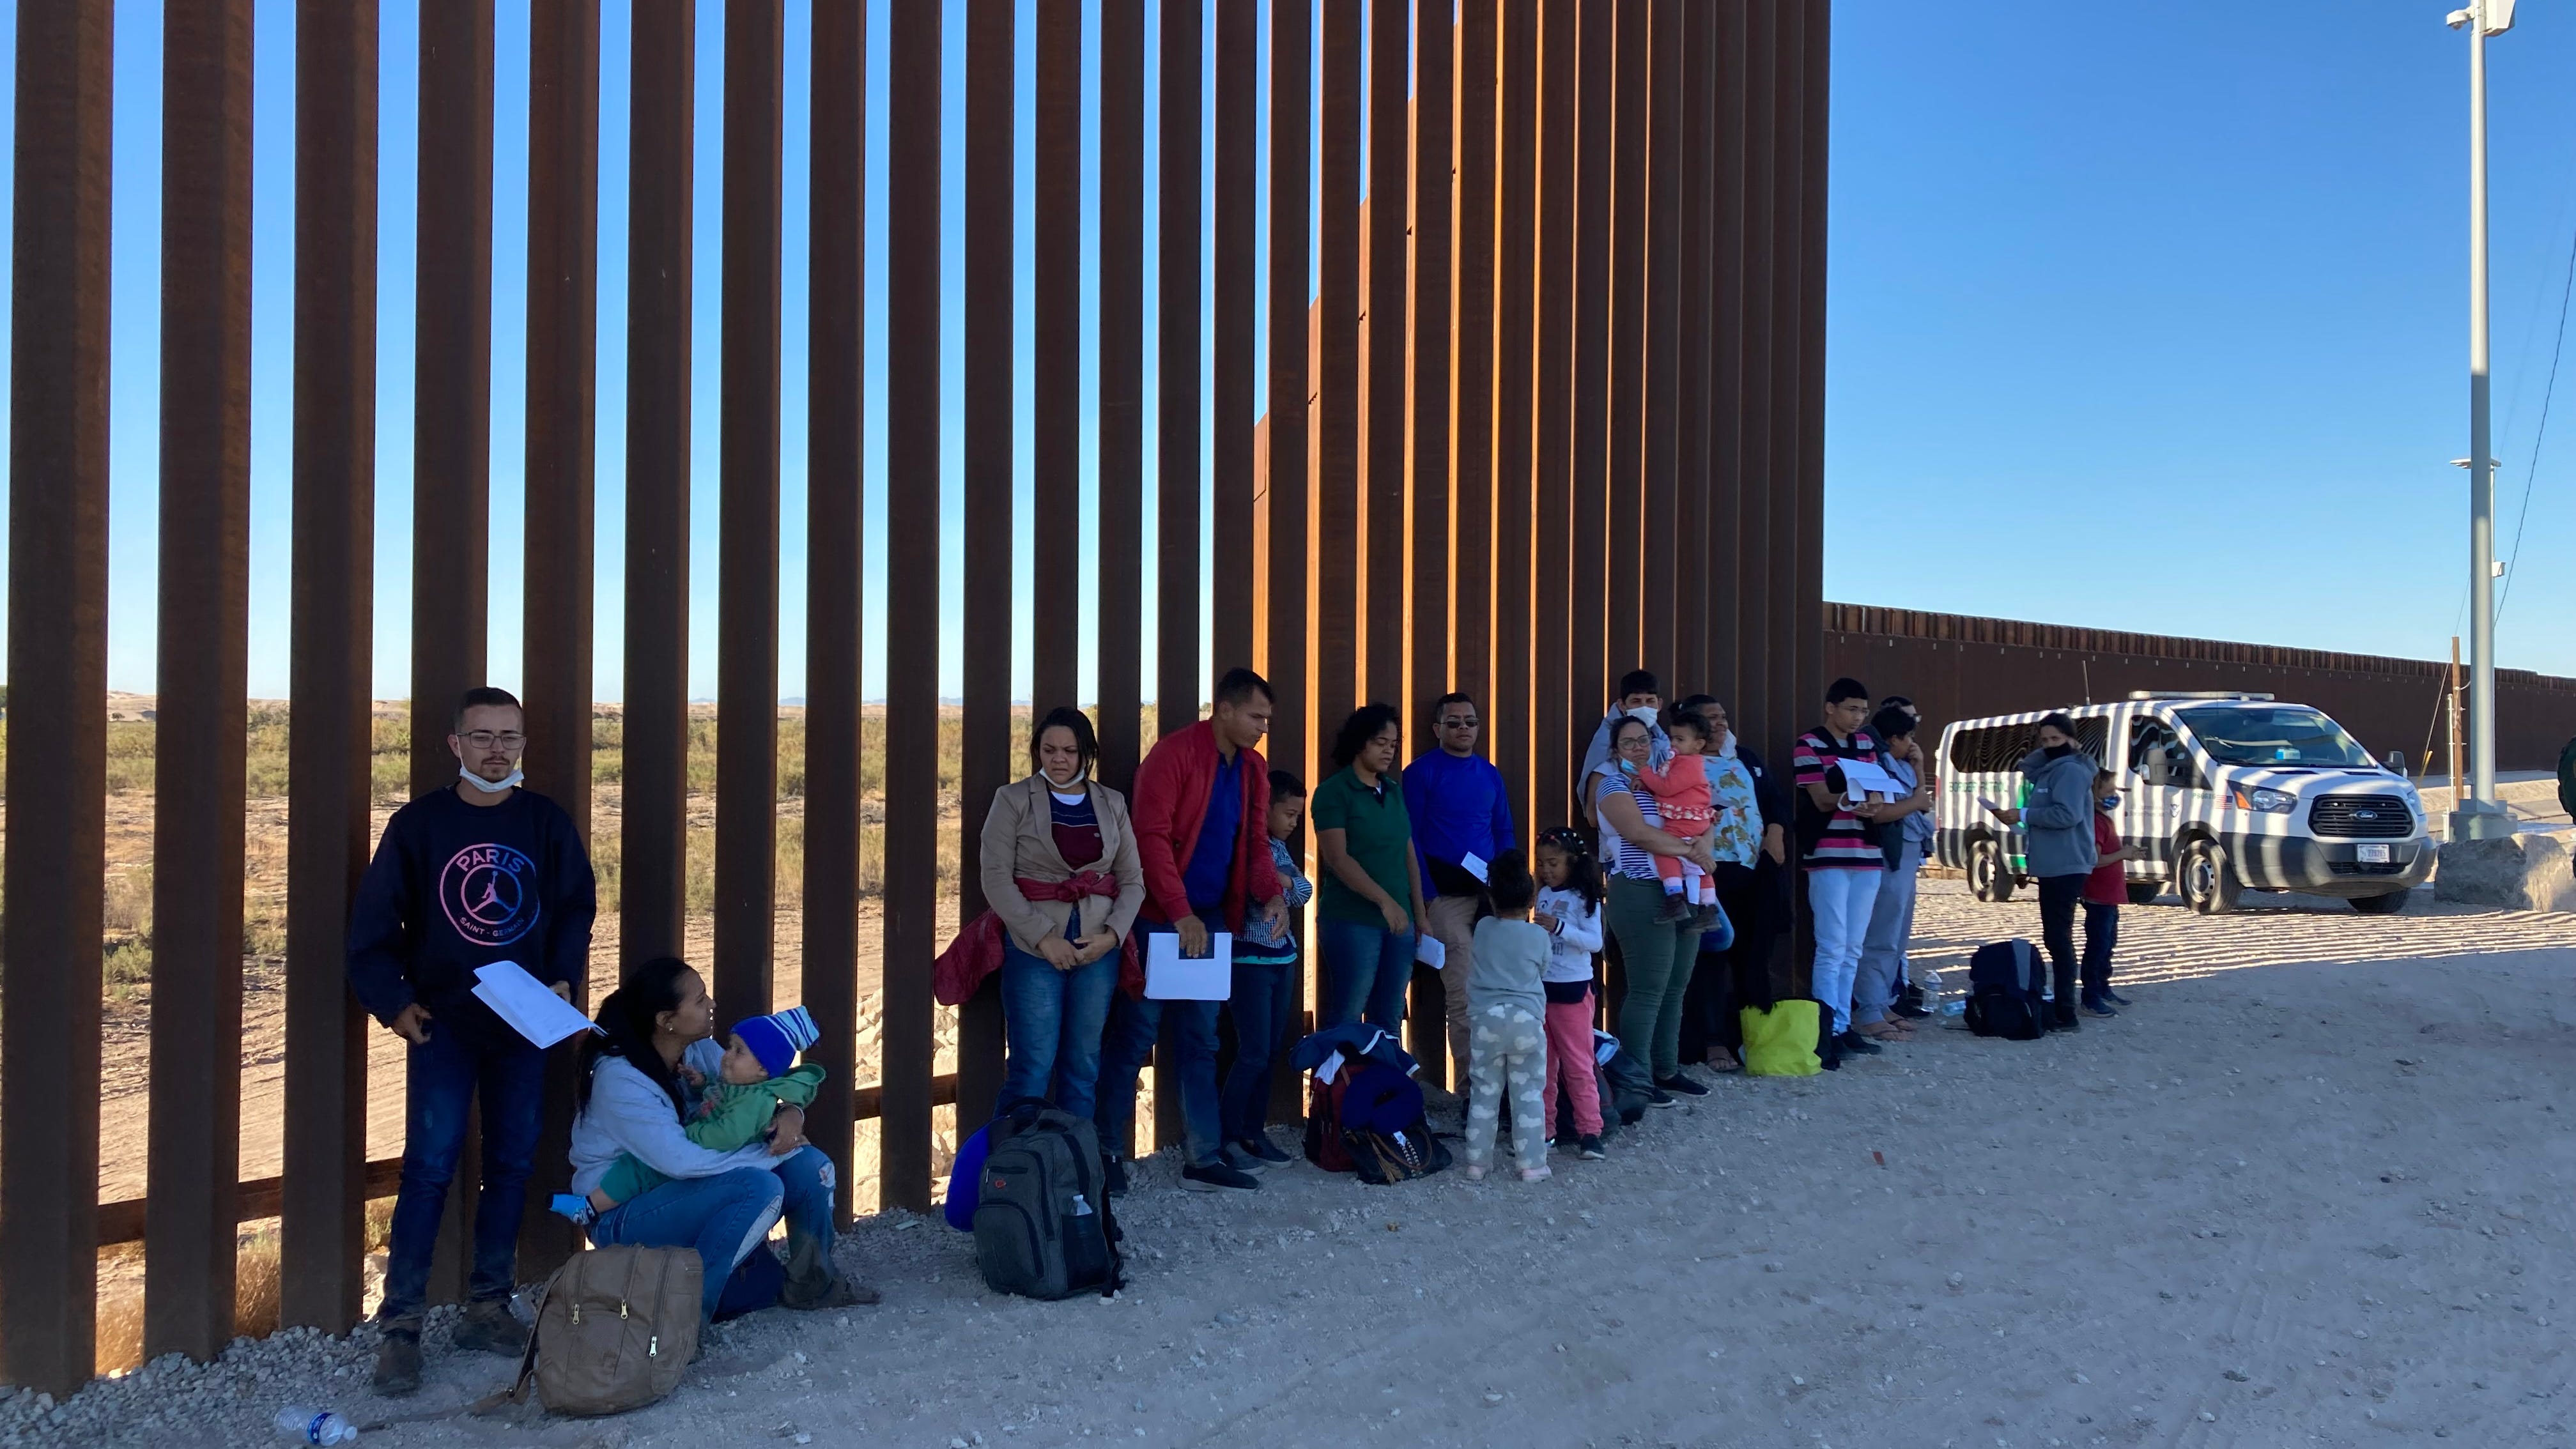 Families and single adults wait with their papers in hand to be processed by Border Patrol agents. The group of about 30 people crossed the U.S.-Mexico border illegally near Somerton, Arizona, on Monday, Nov. 29, 2021.